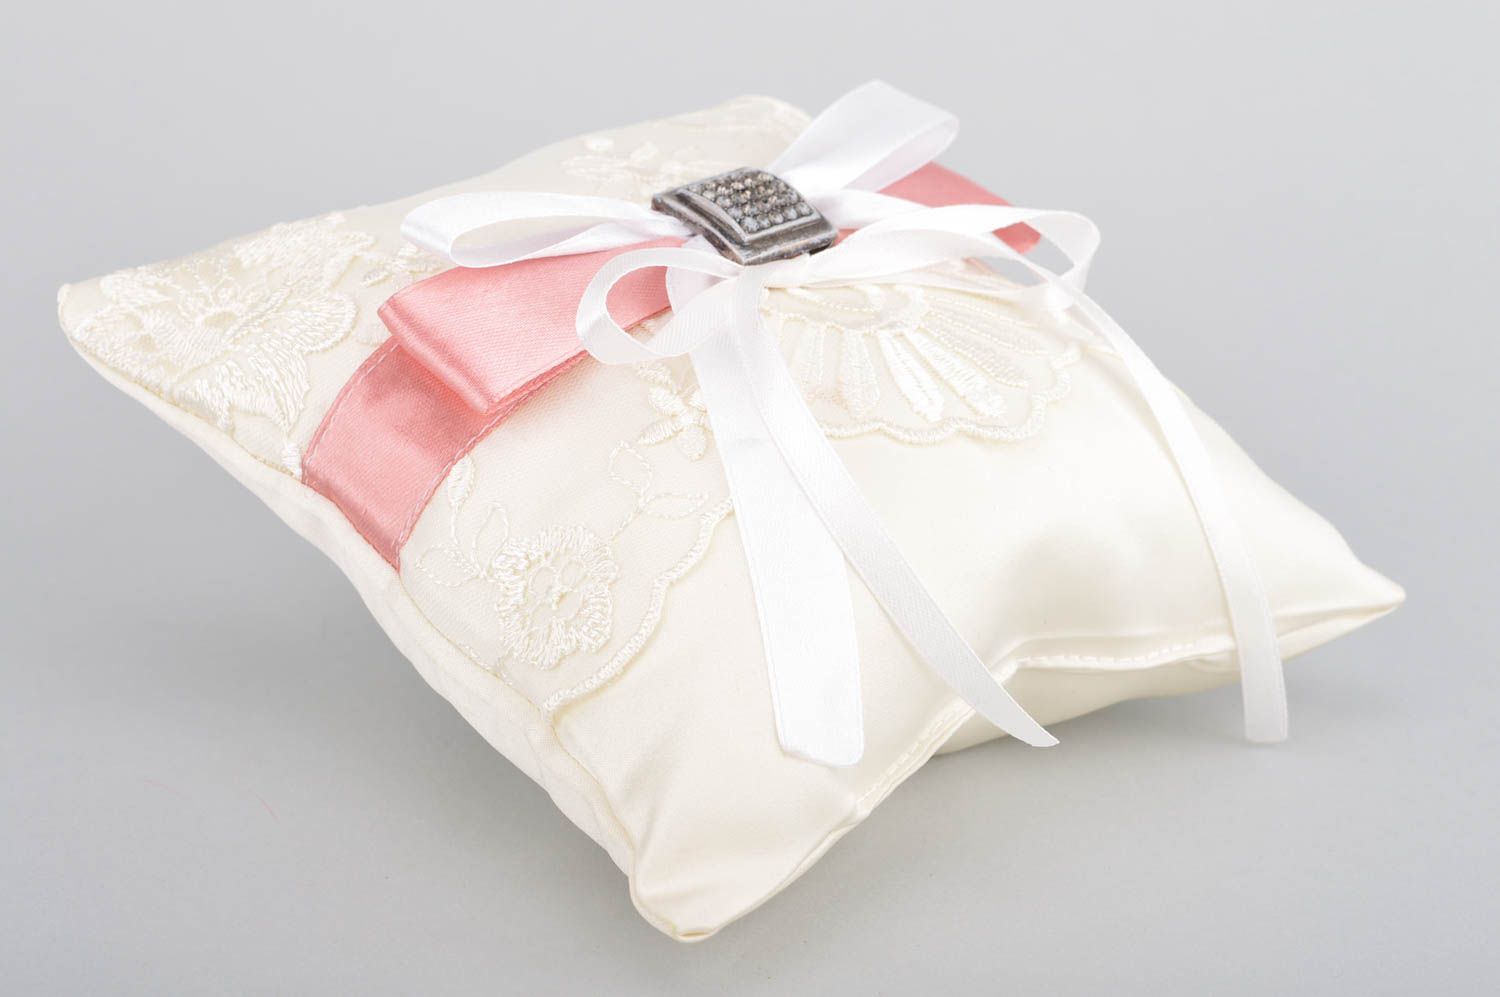 Homemade wedding ring pillow sewn of white satin with lace and pink ribbon photo 2